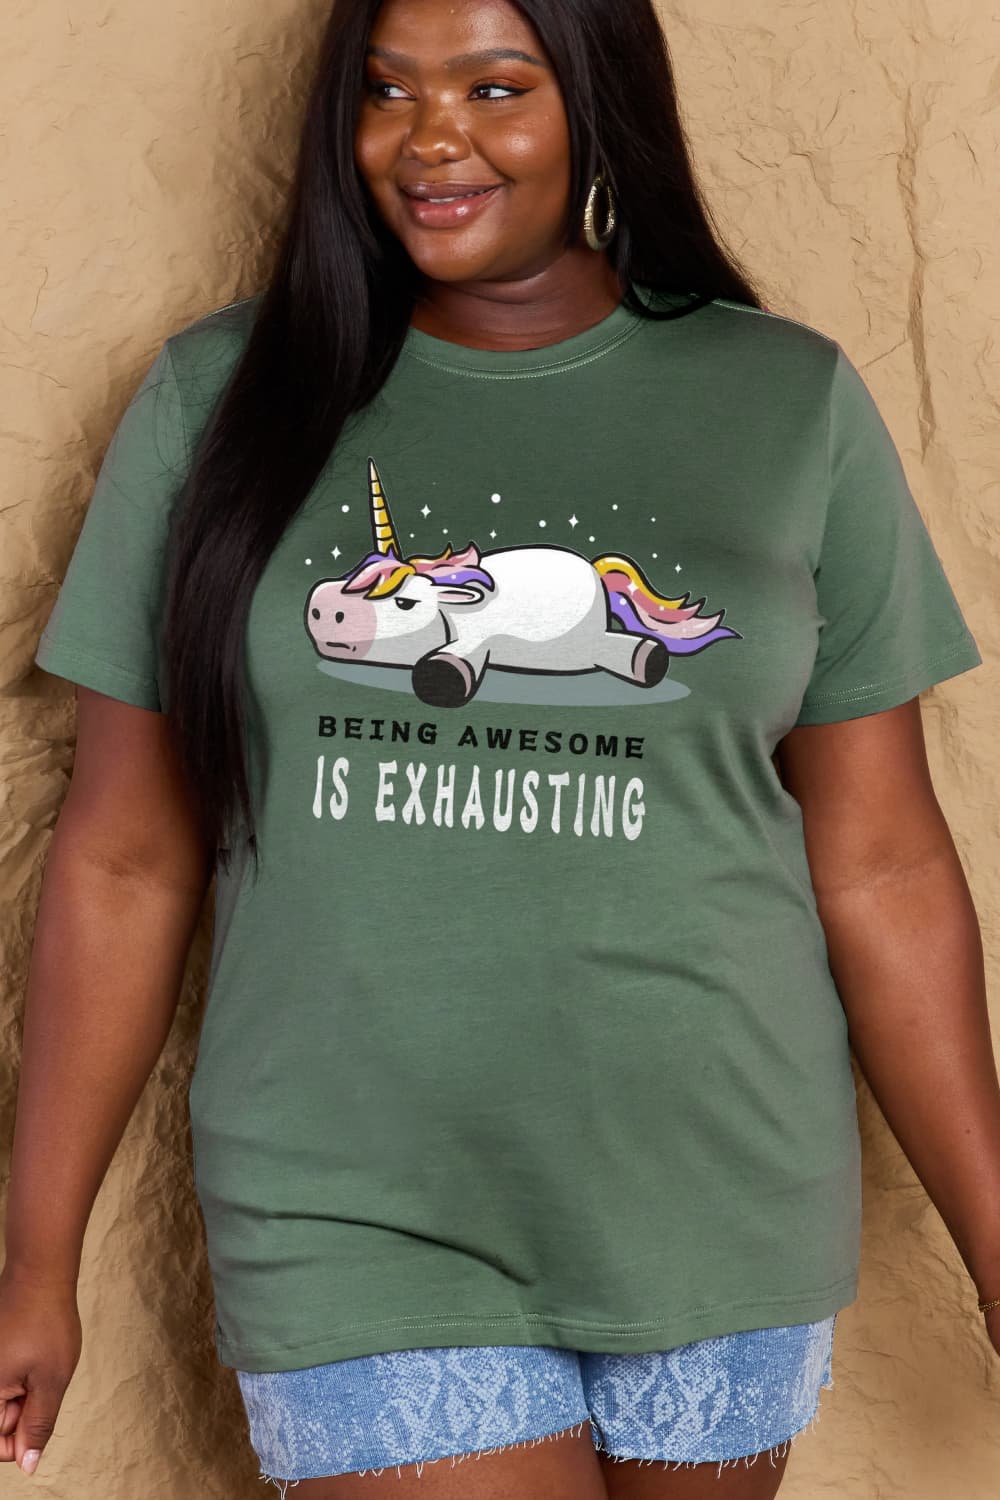 Full Size BEING AWESOME IS EXHAUSTING Graphic Cotton Tee - Kawaii Stop - Casual Style, Comfortable, Confidence, Empowering, Everyday Wear, Fashionista's Choice, Graphic Tee, Hand Wash, Imported, Inspirational, Long Tee, Opaque, Relaxed Fit, Ship From Overseas, Shipping Delay 09/29/2023 - 10/04/2023, Simply Love, Statement Piece, T-Shirt, T-Shirts, Tee, Trendy, Versatile, Women's Clothing, Women's Top